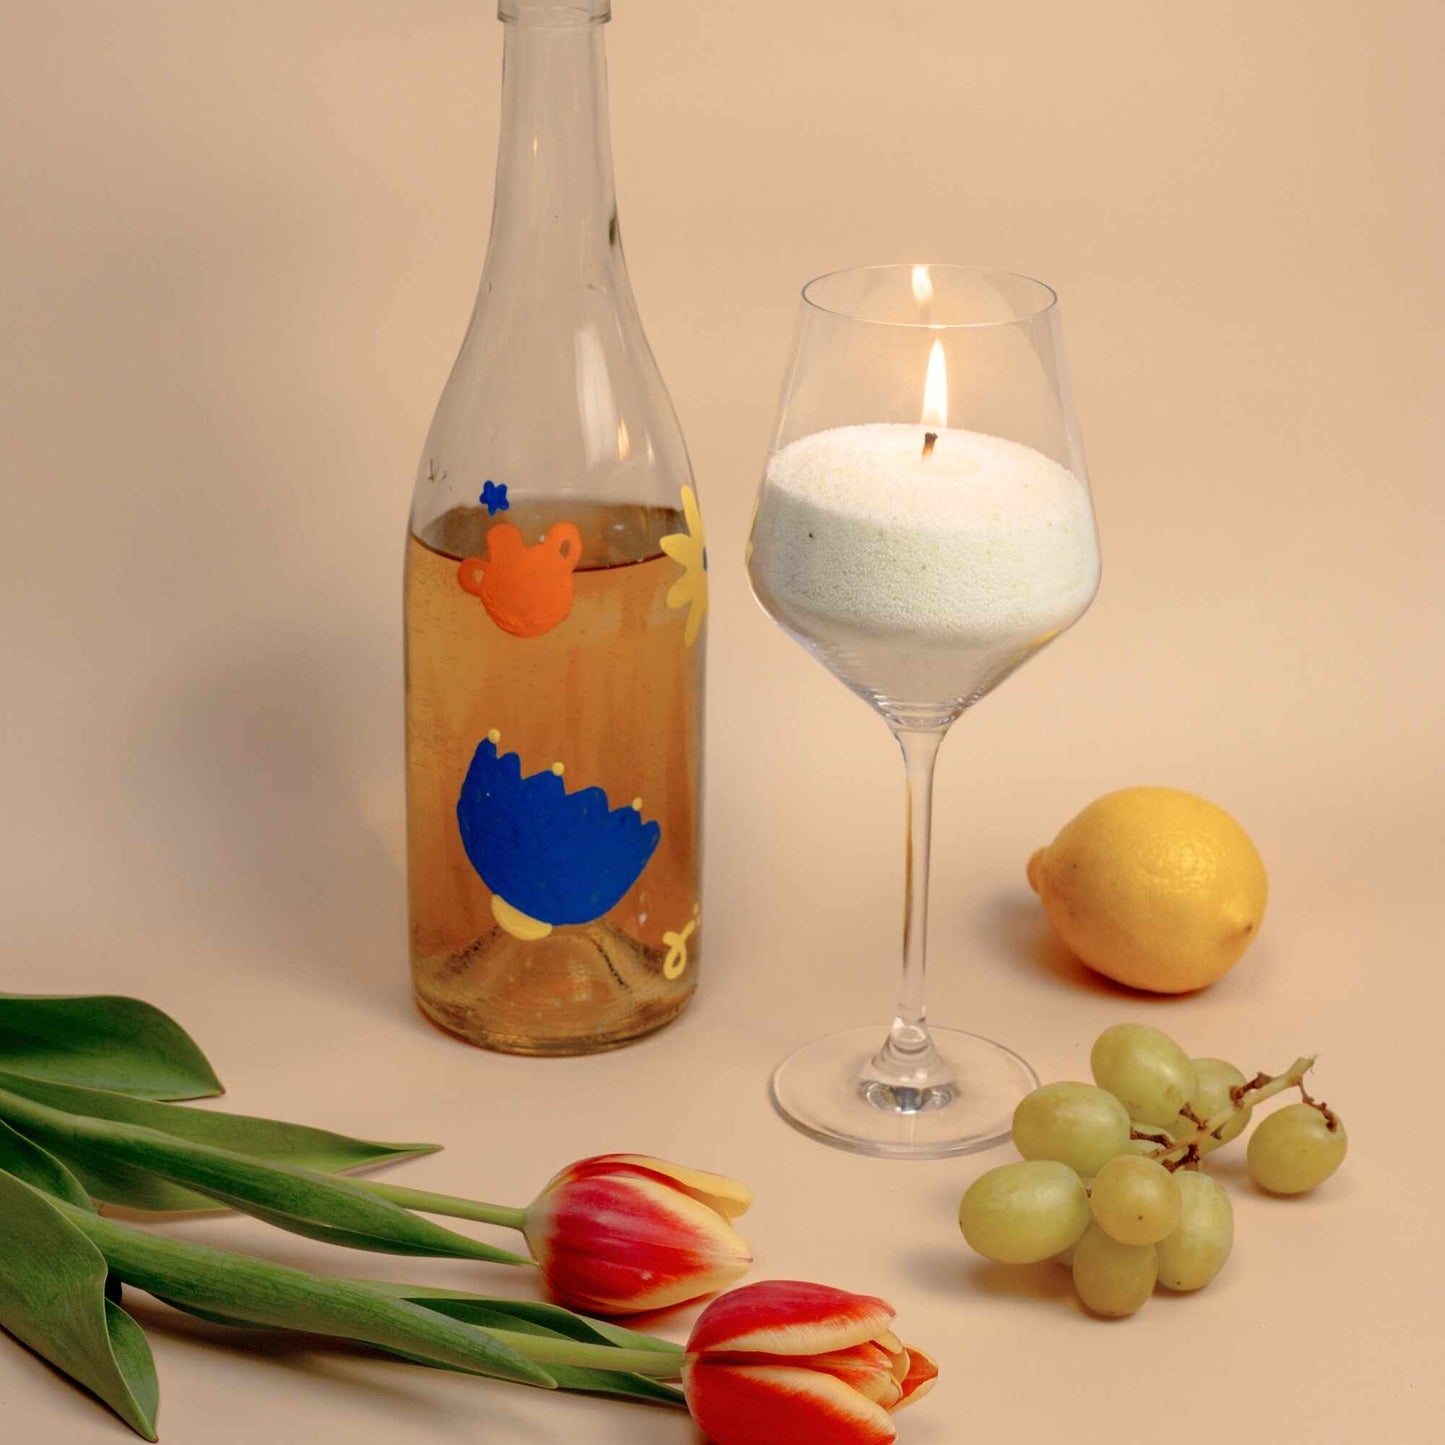 Candles lighting in a wine glass, showcasing the versatility of sand candles.